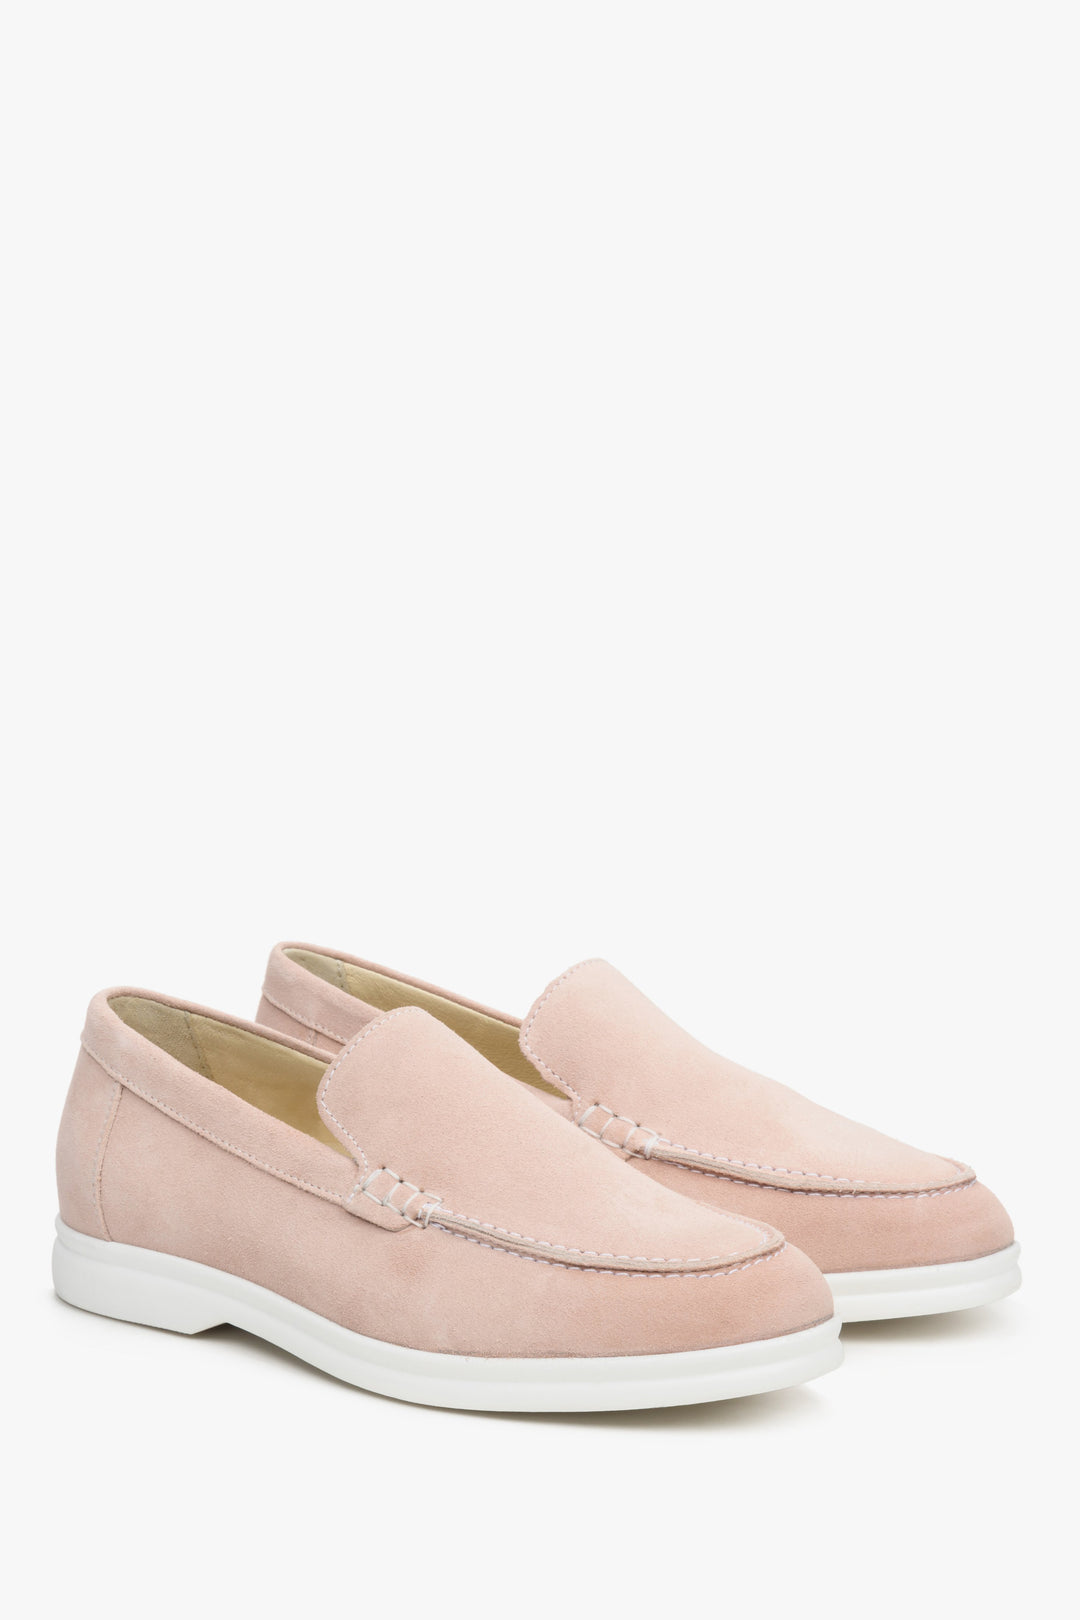 Women's suede loafers in light pink Estro - presentation of the sideline and white sole.